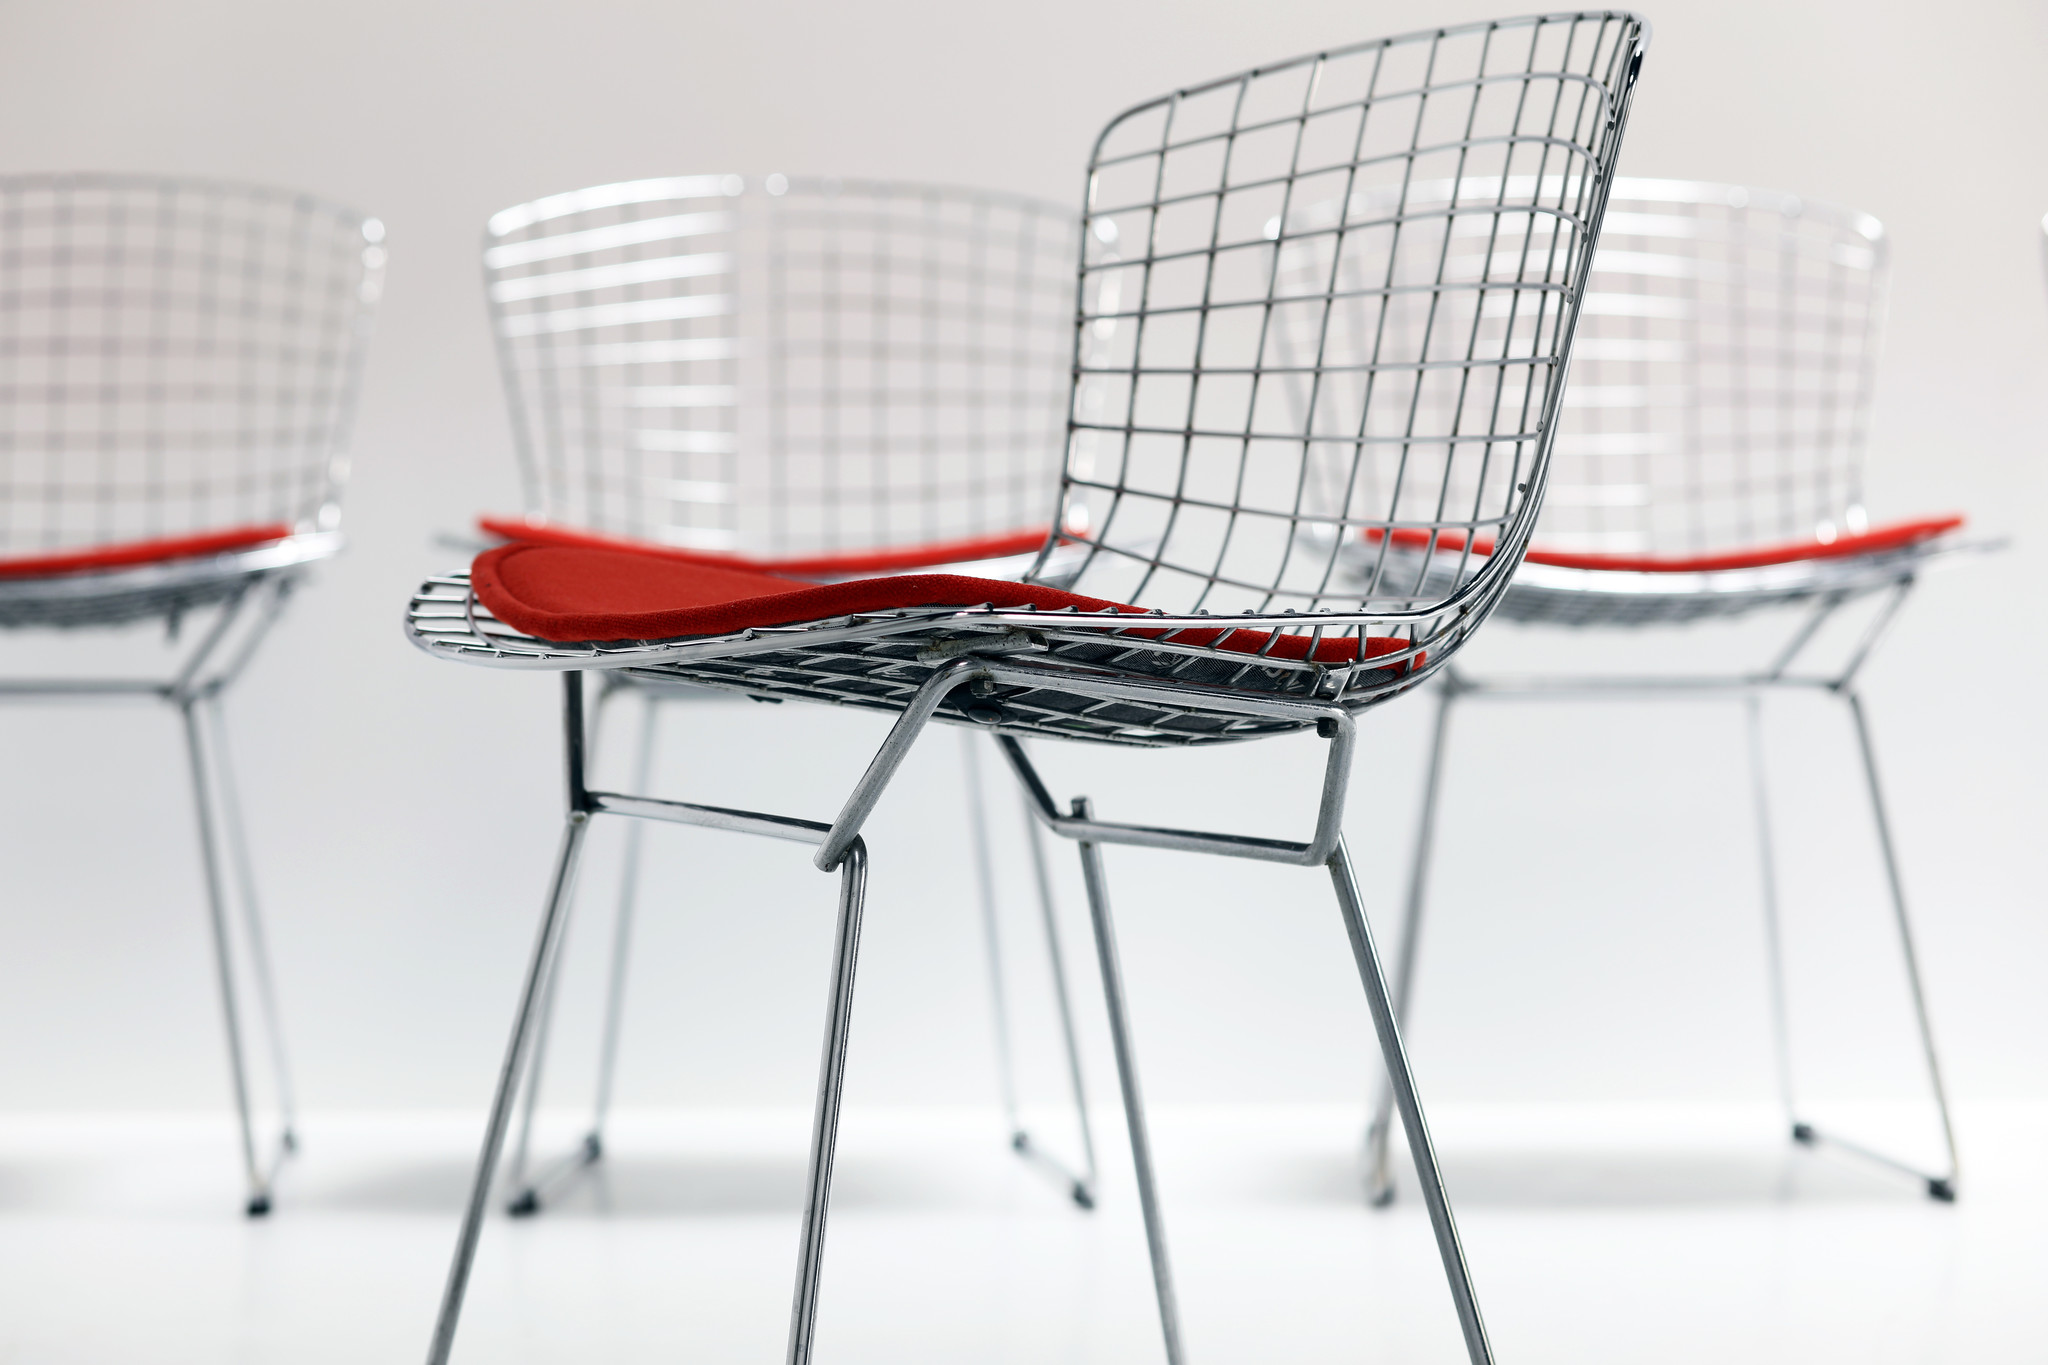 Set of Bertoia Chairs by Harry Bertoia for Knoll, 1953